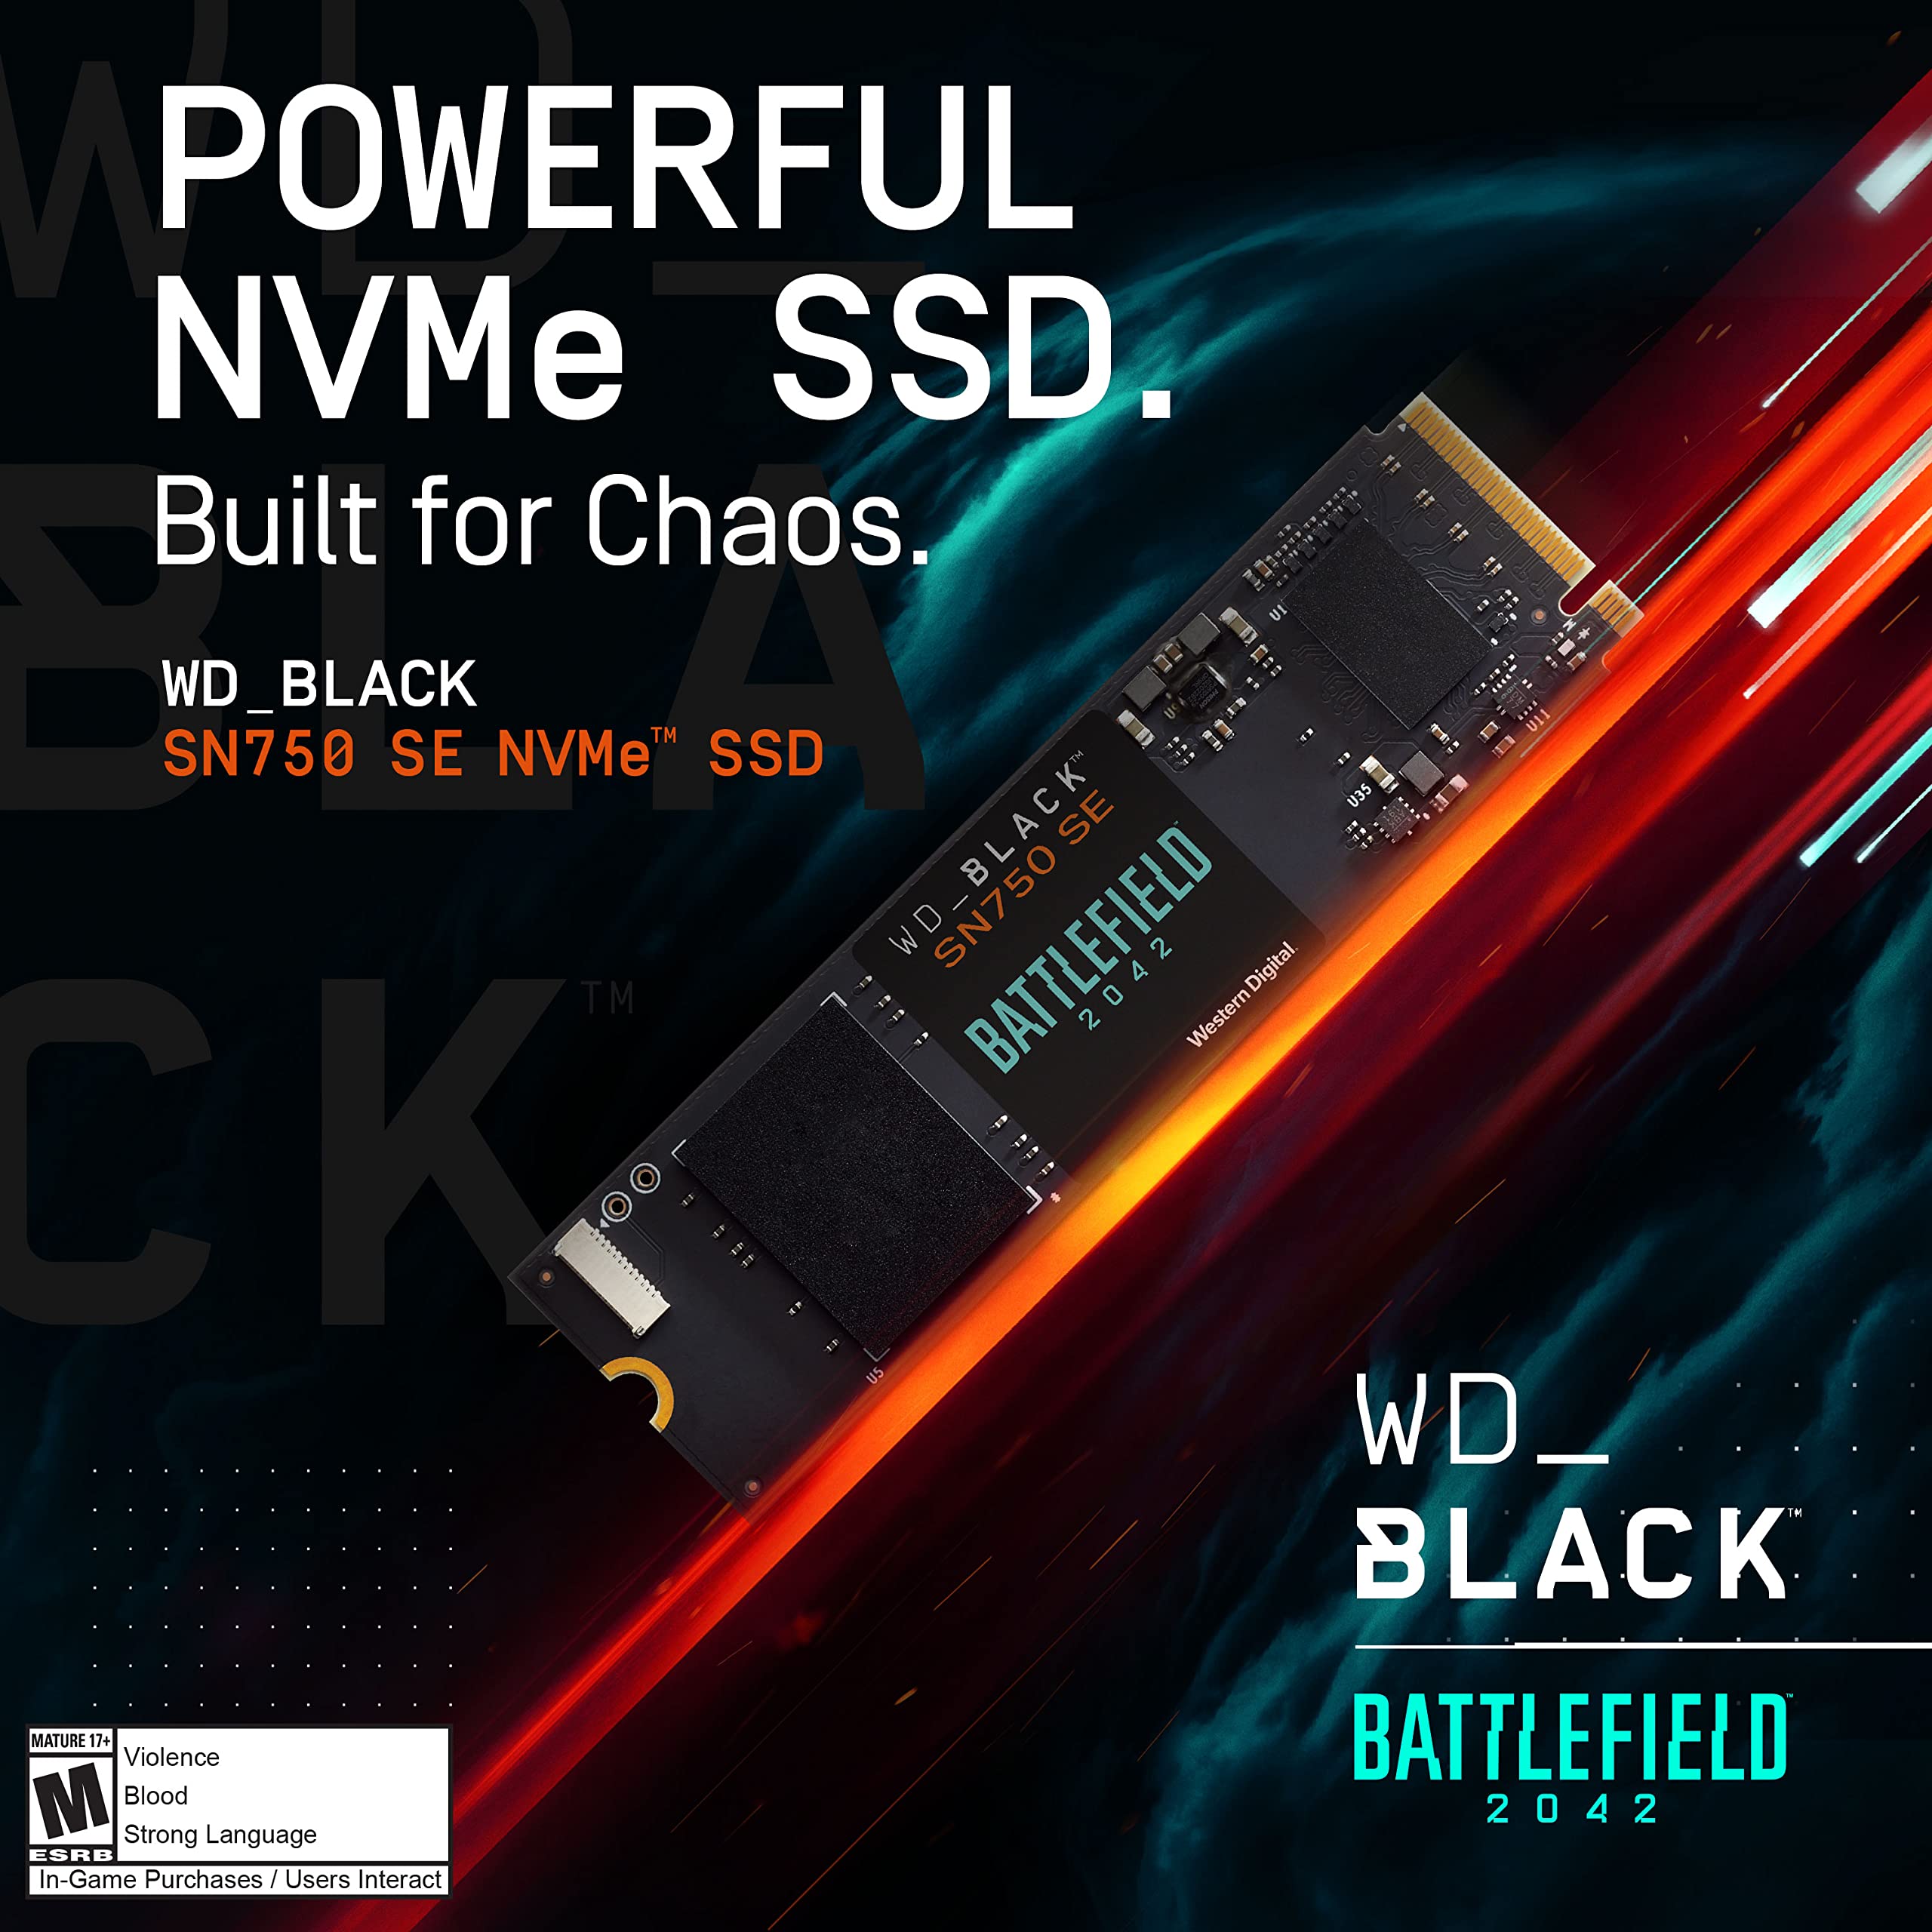 WD_BLACK 1TB SN750 SE NVMe SSD with Battlefield 2042 Game Code Bundle - Gen4 PCle, Internal Gaming SSD Solid State Drive, M.2 2280, Up to 3,600 MB/s - WDBB9J0010BNC-NRSN